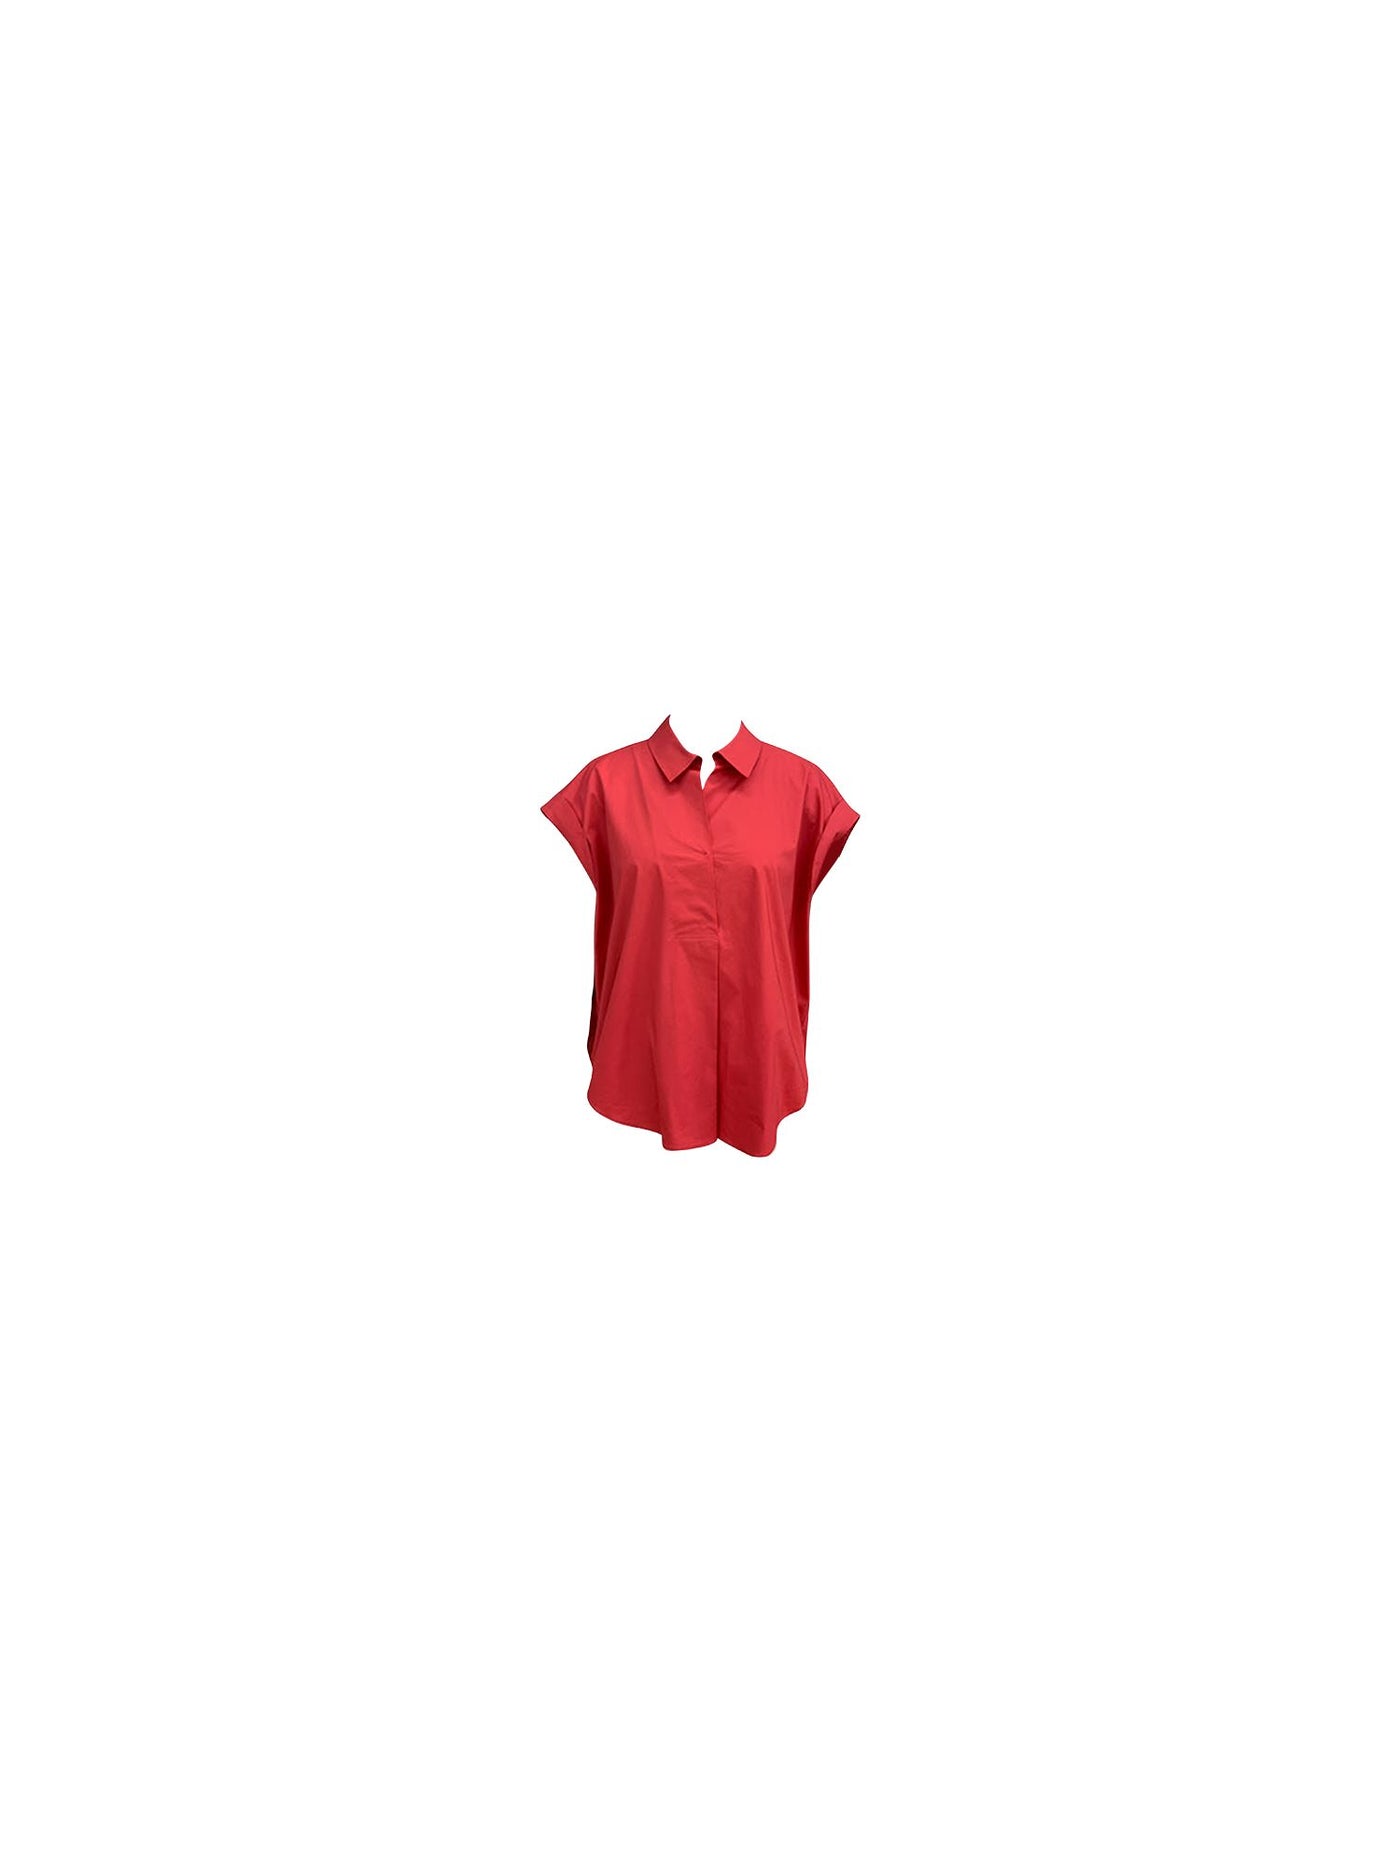 ALFANI Womens Red Pleated Cap Sleeve Collared Top Size: M